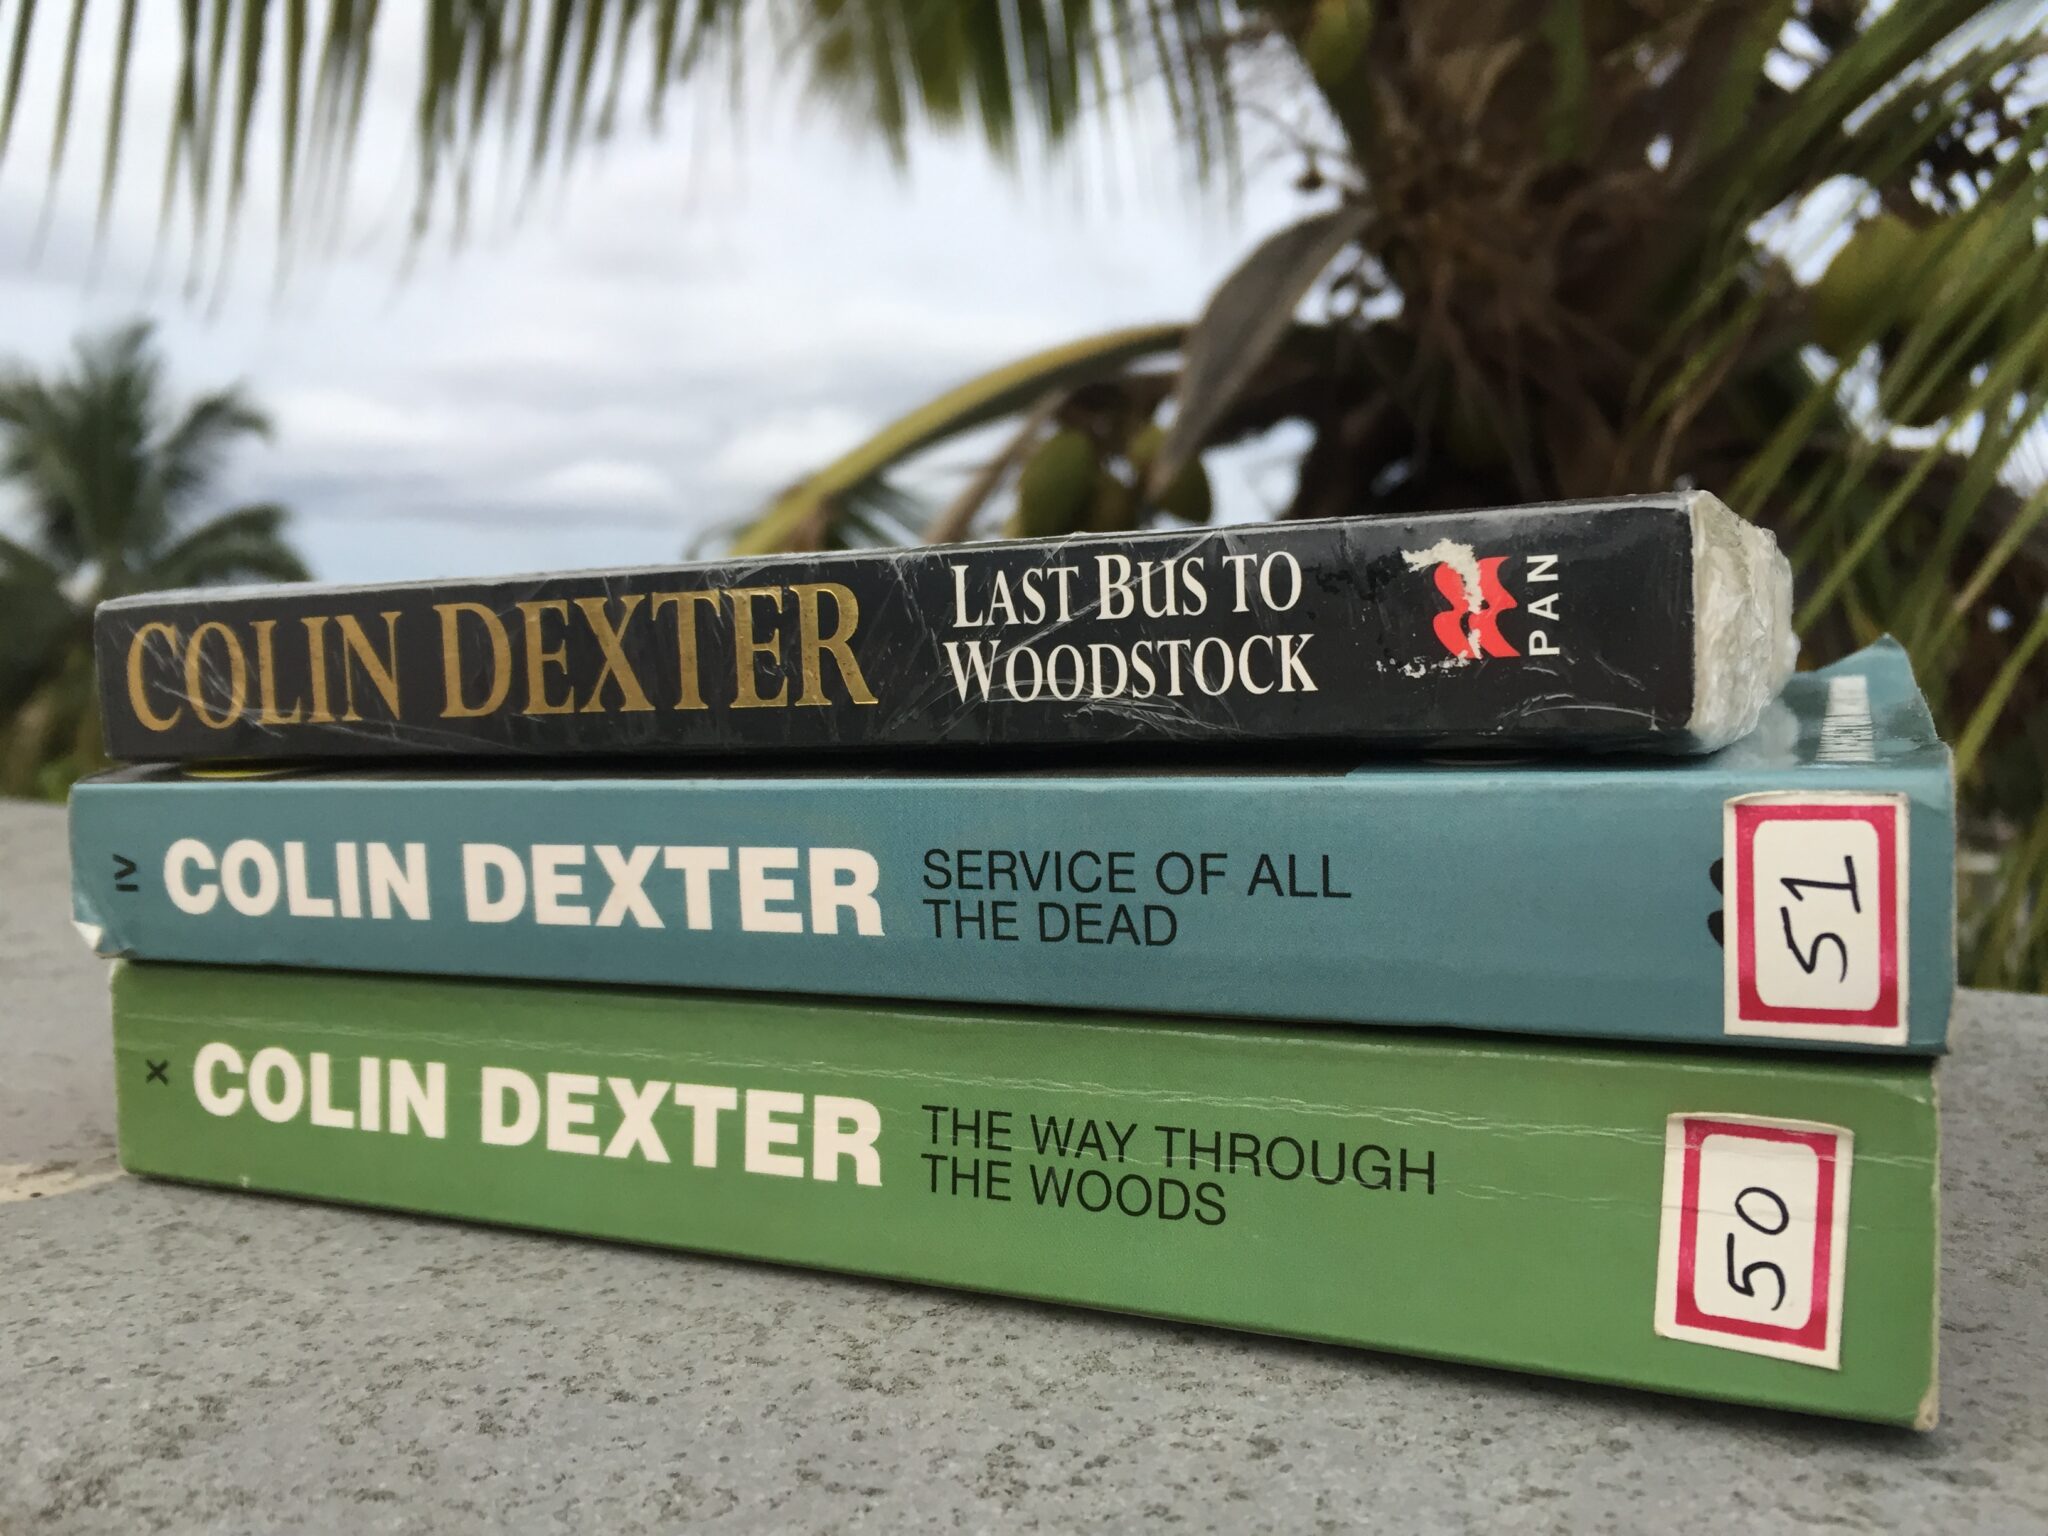 photo of 3 Inspector Morse books on the terrace with coconut tree in background